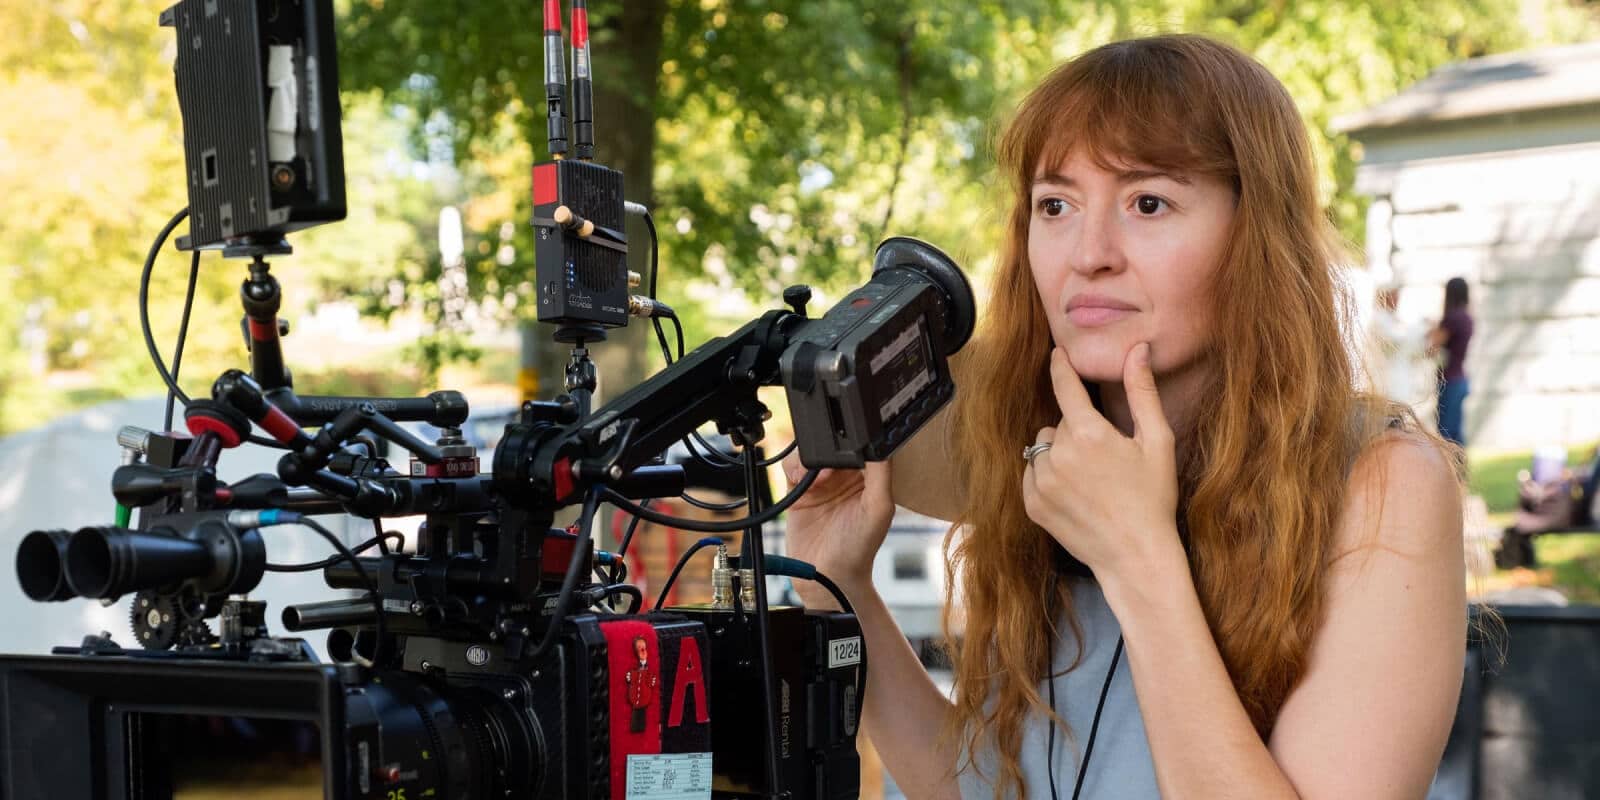 The Best Female Film Directors Working Today